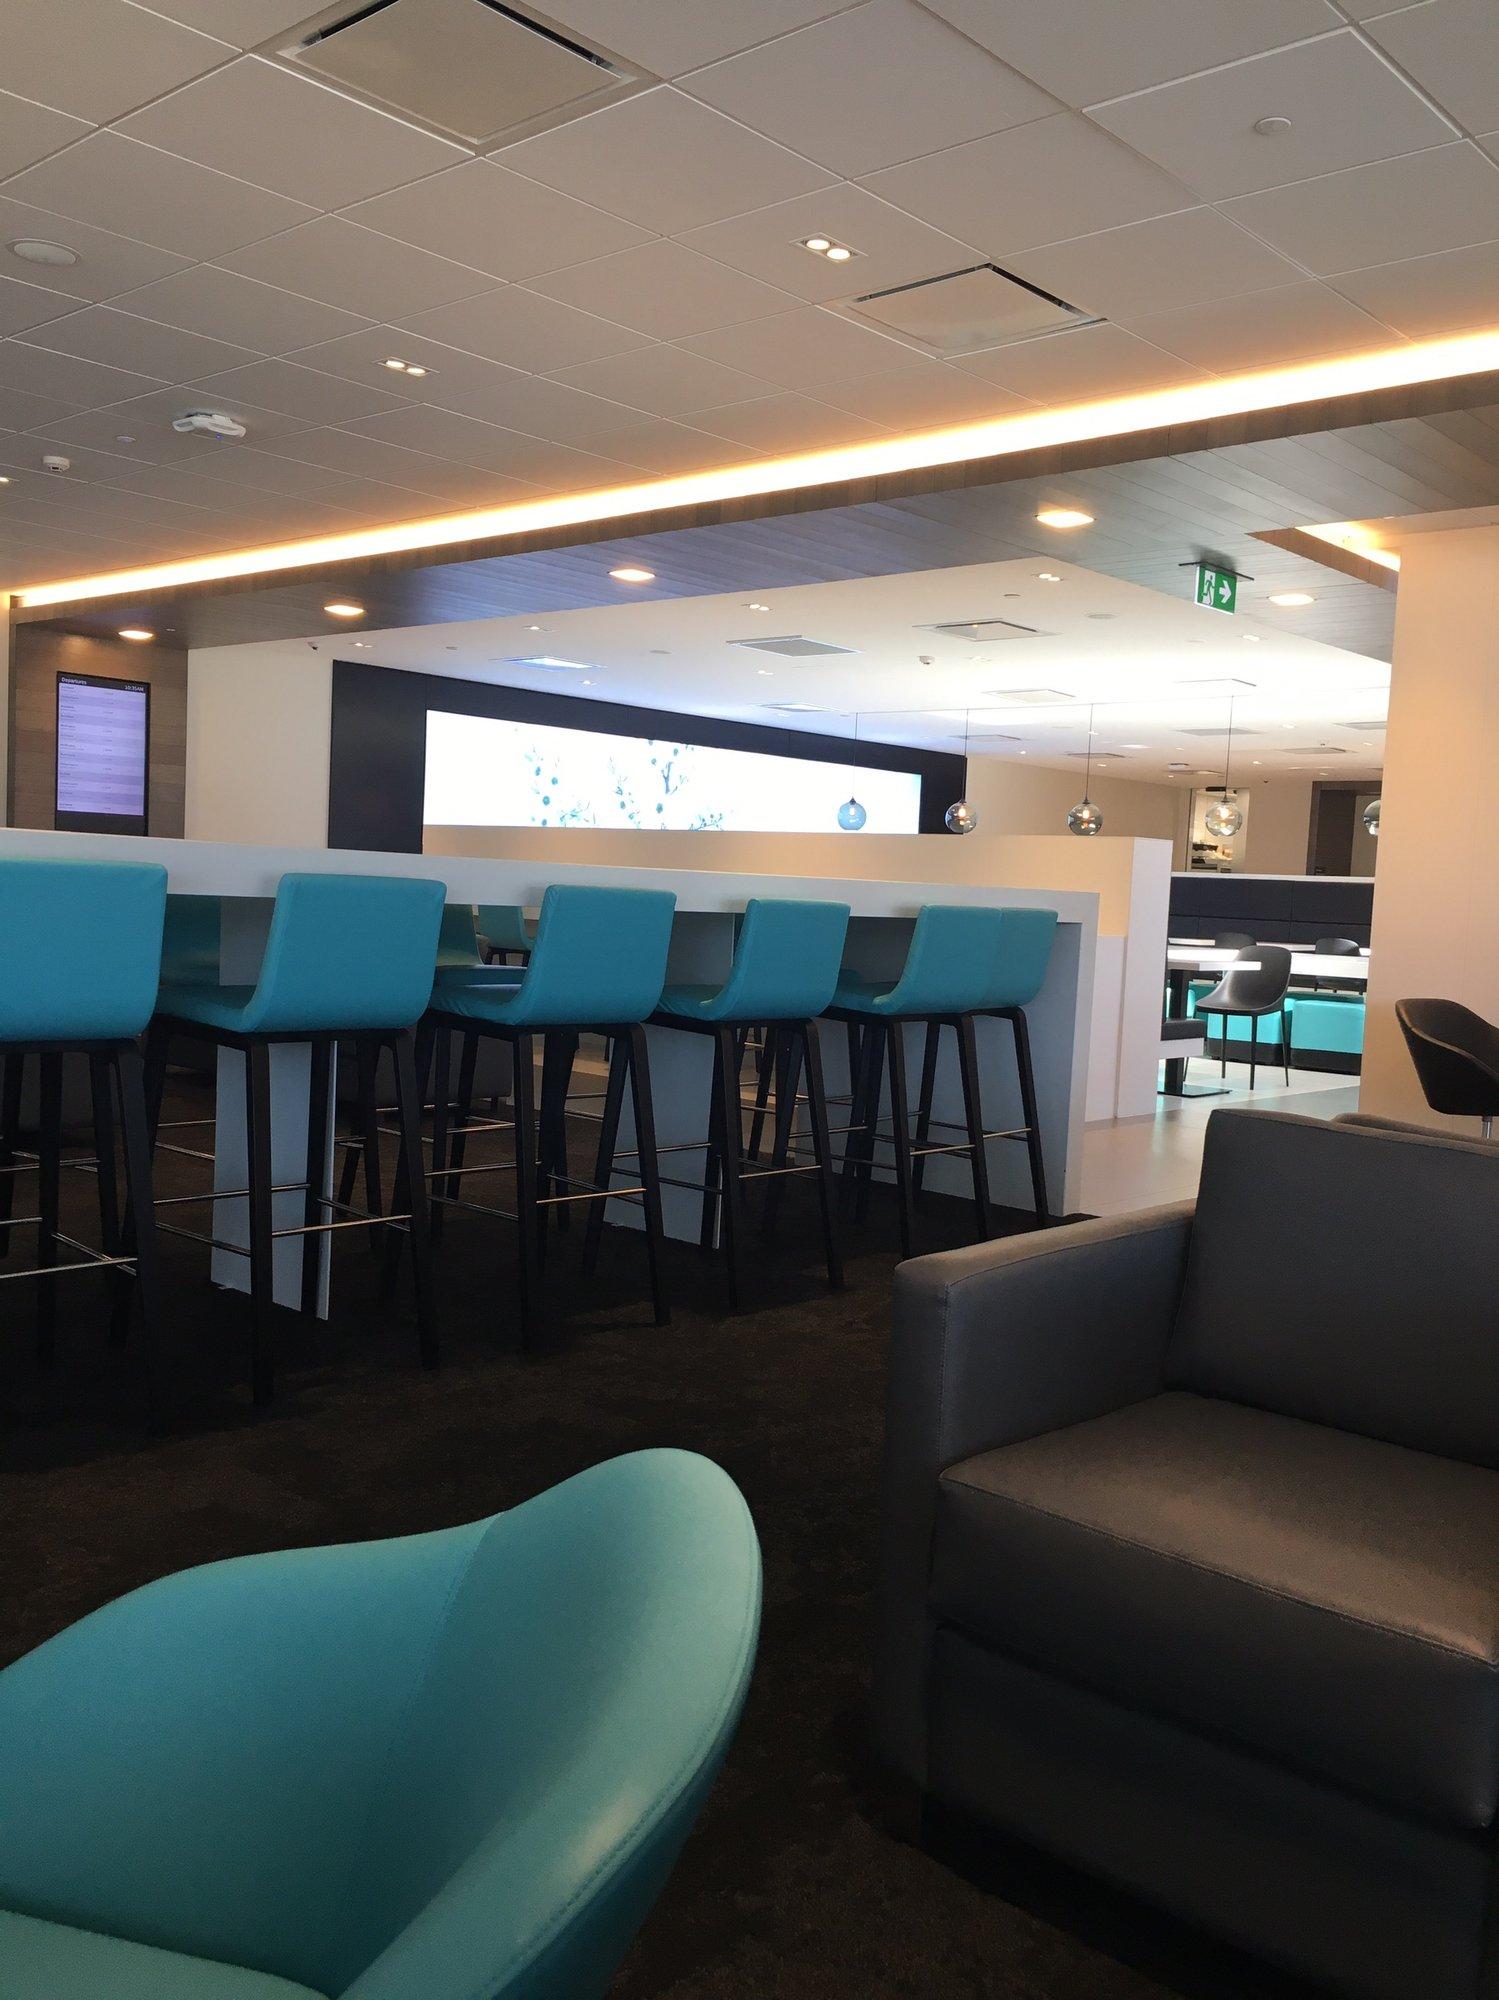 Air New Zealand Regional Lounge image 2 of 7